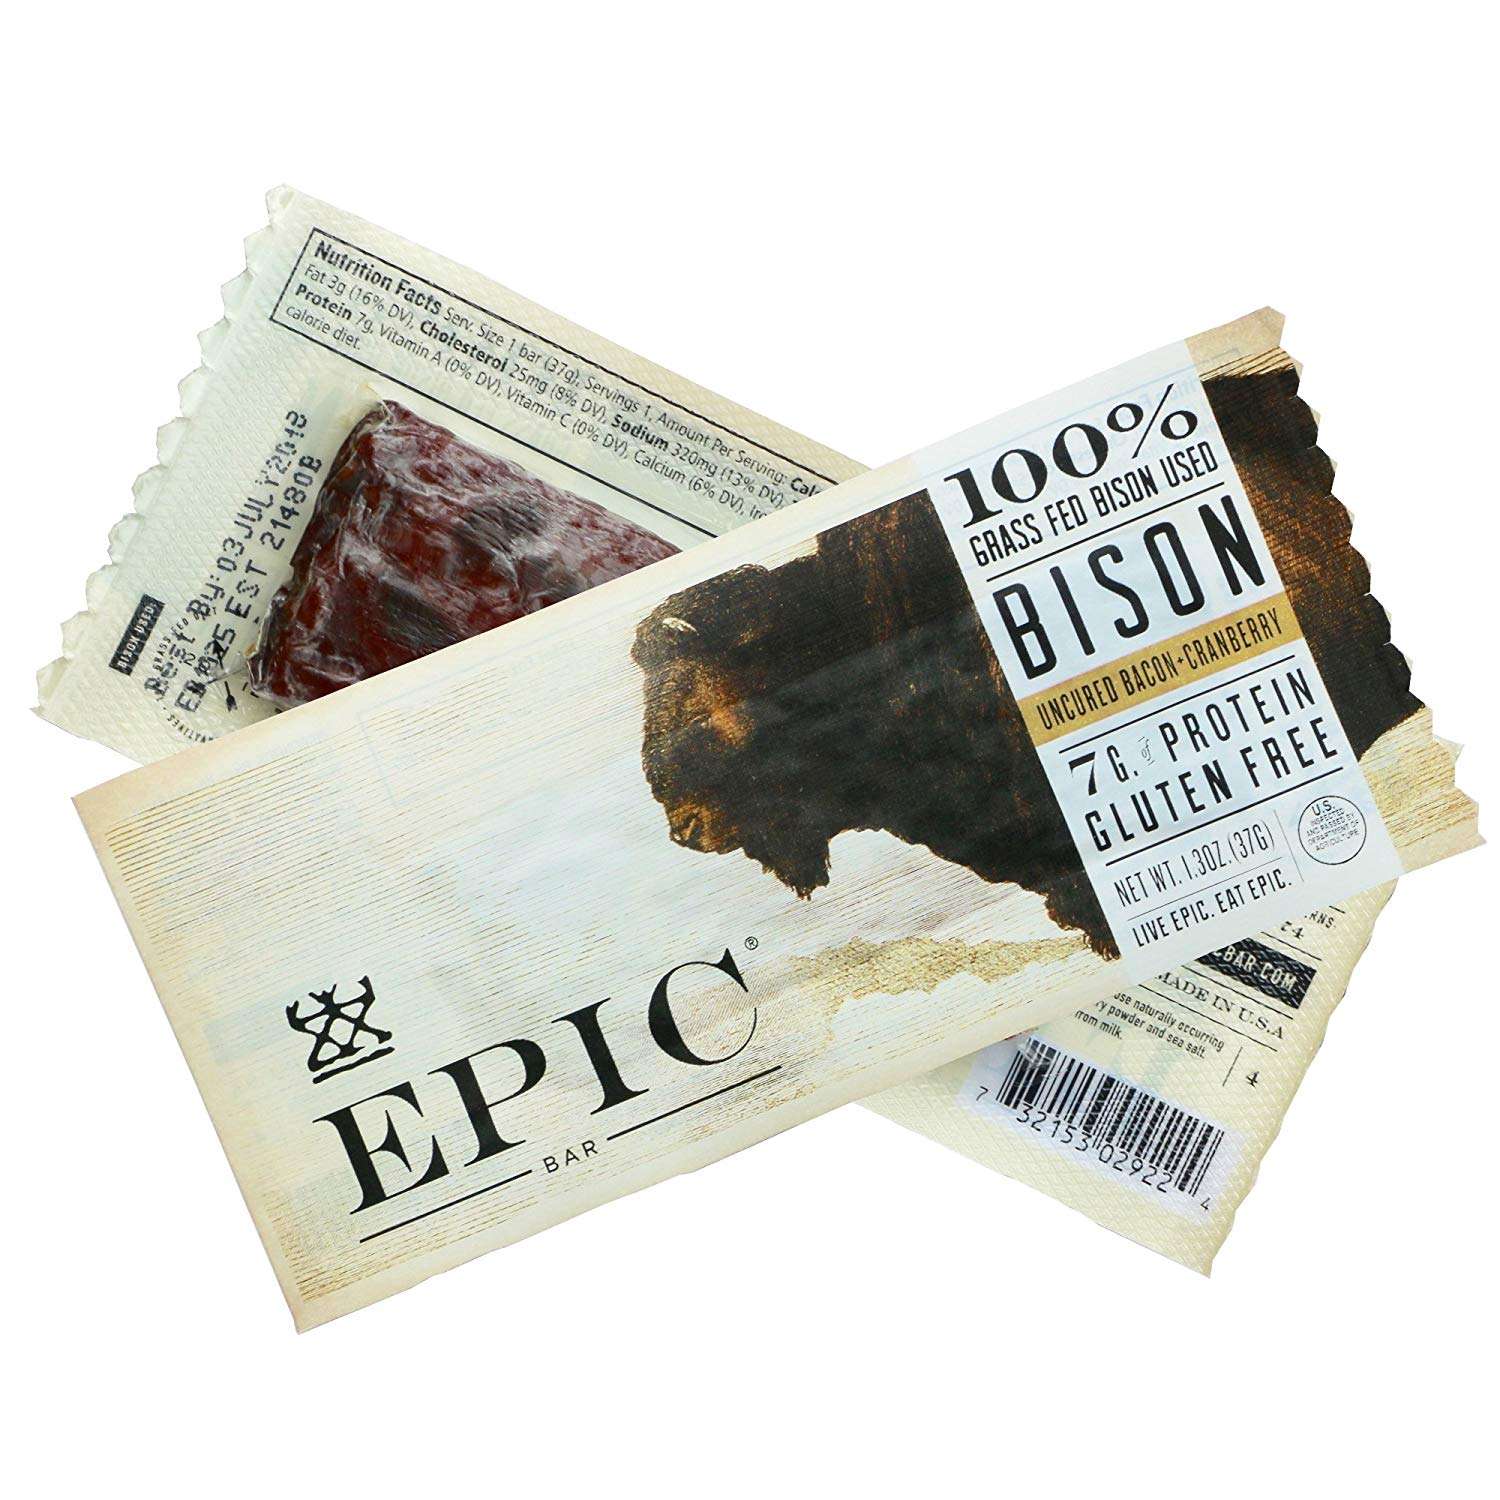 epic bison bar best gifts for hikers and backpackers